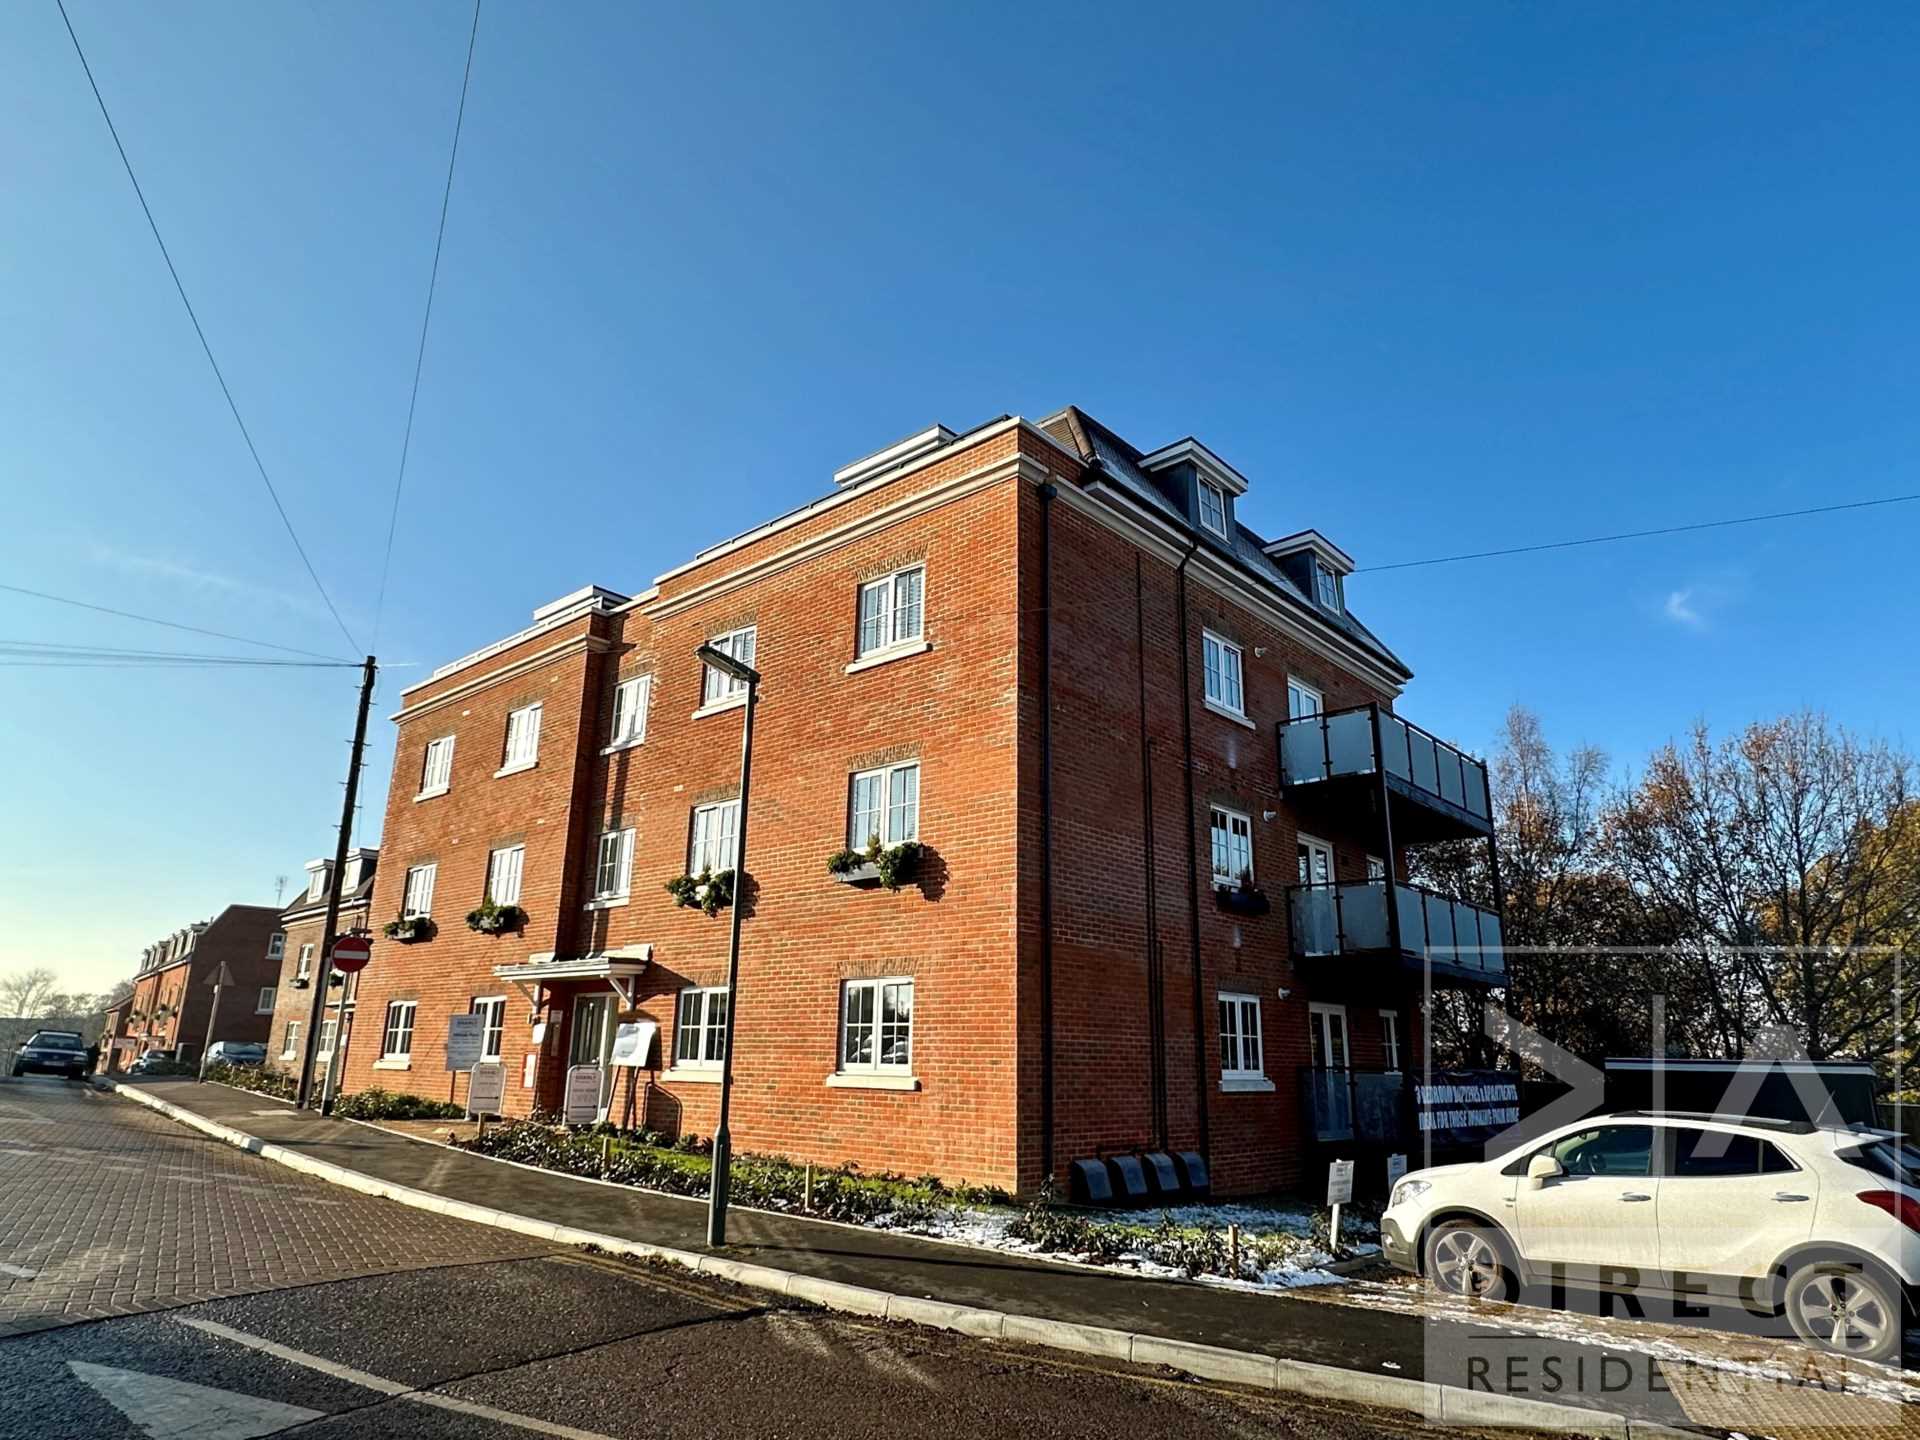 3 bed Apartment for rent in Epsom. From Direct Residential - Epsom